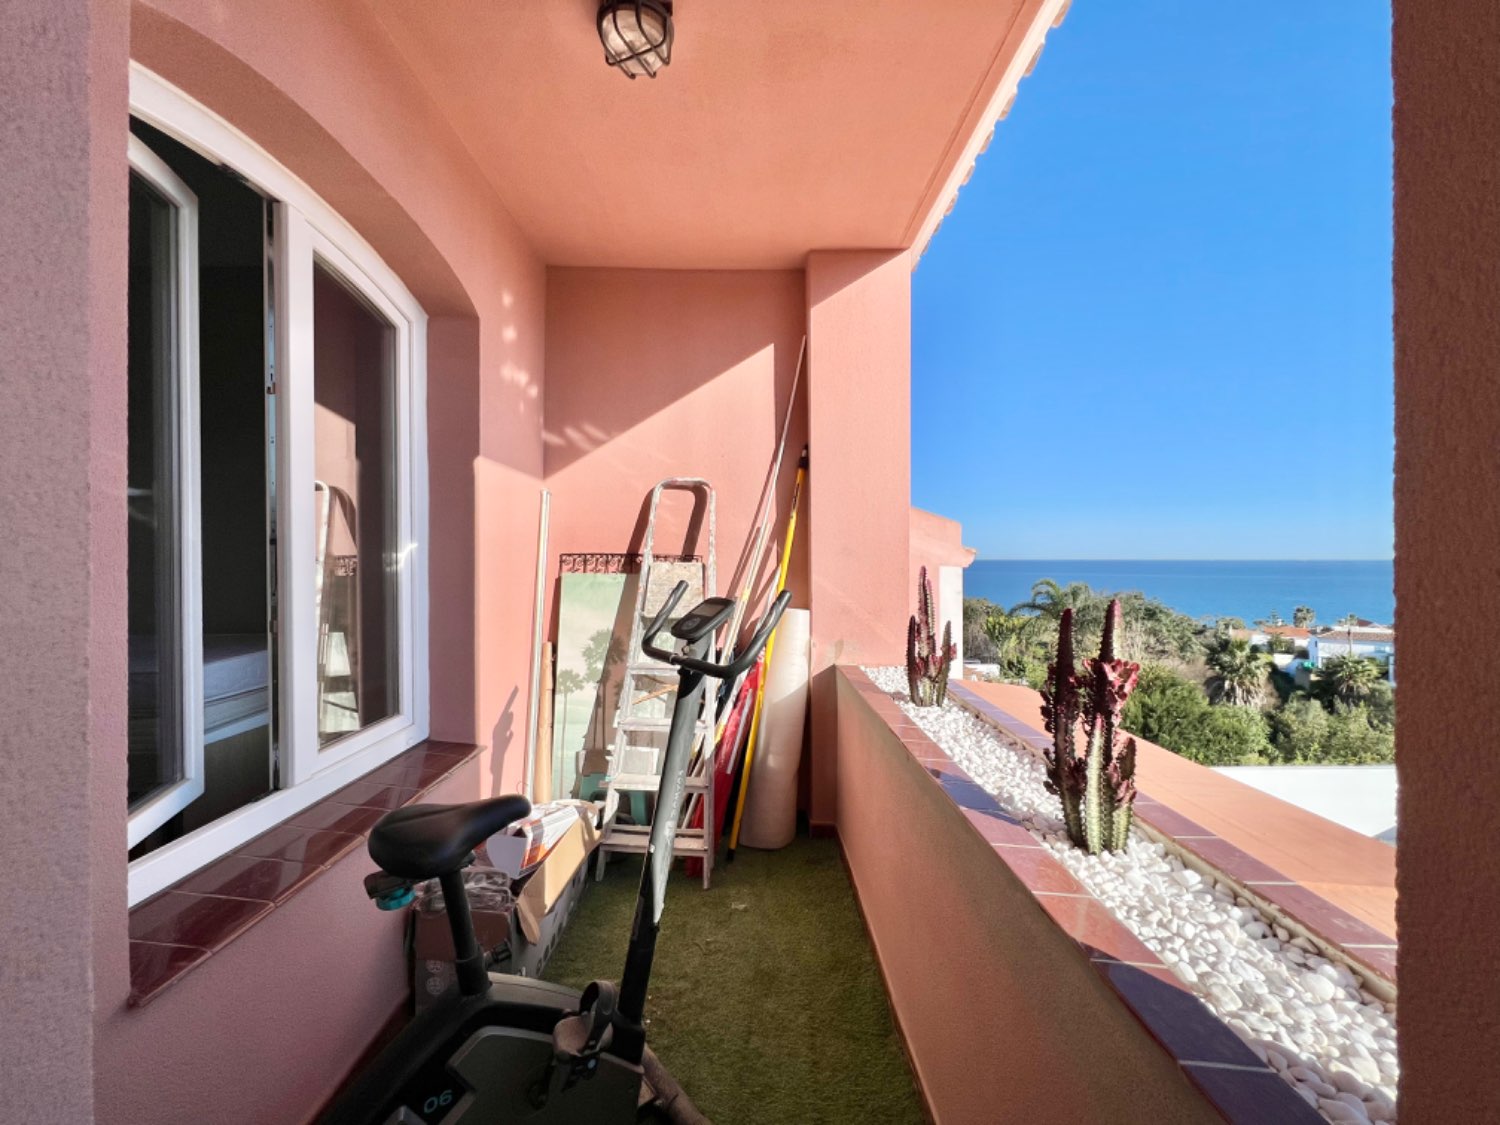 Charming townhouse with three bedroom garden in Alcaidesa a few meters from the beach